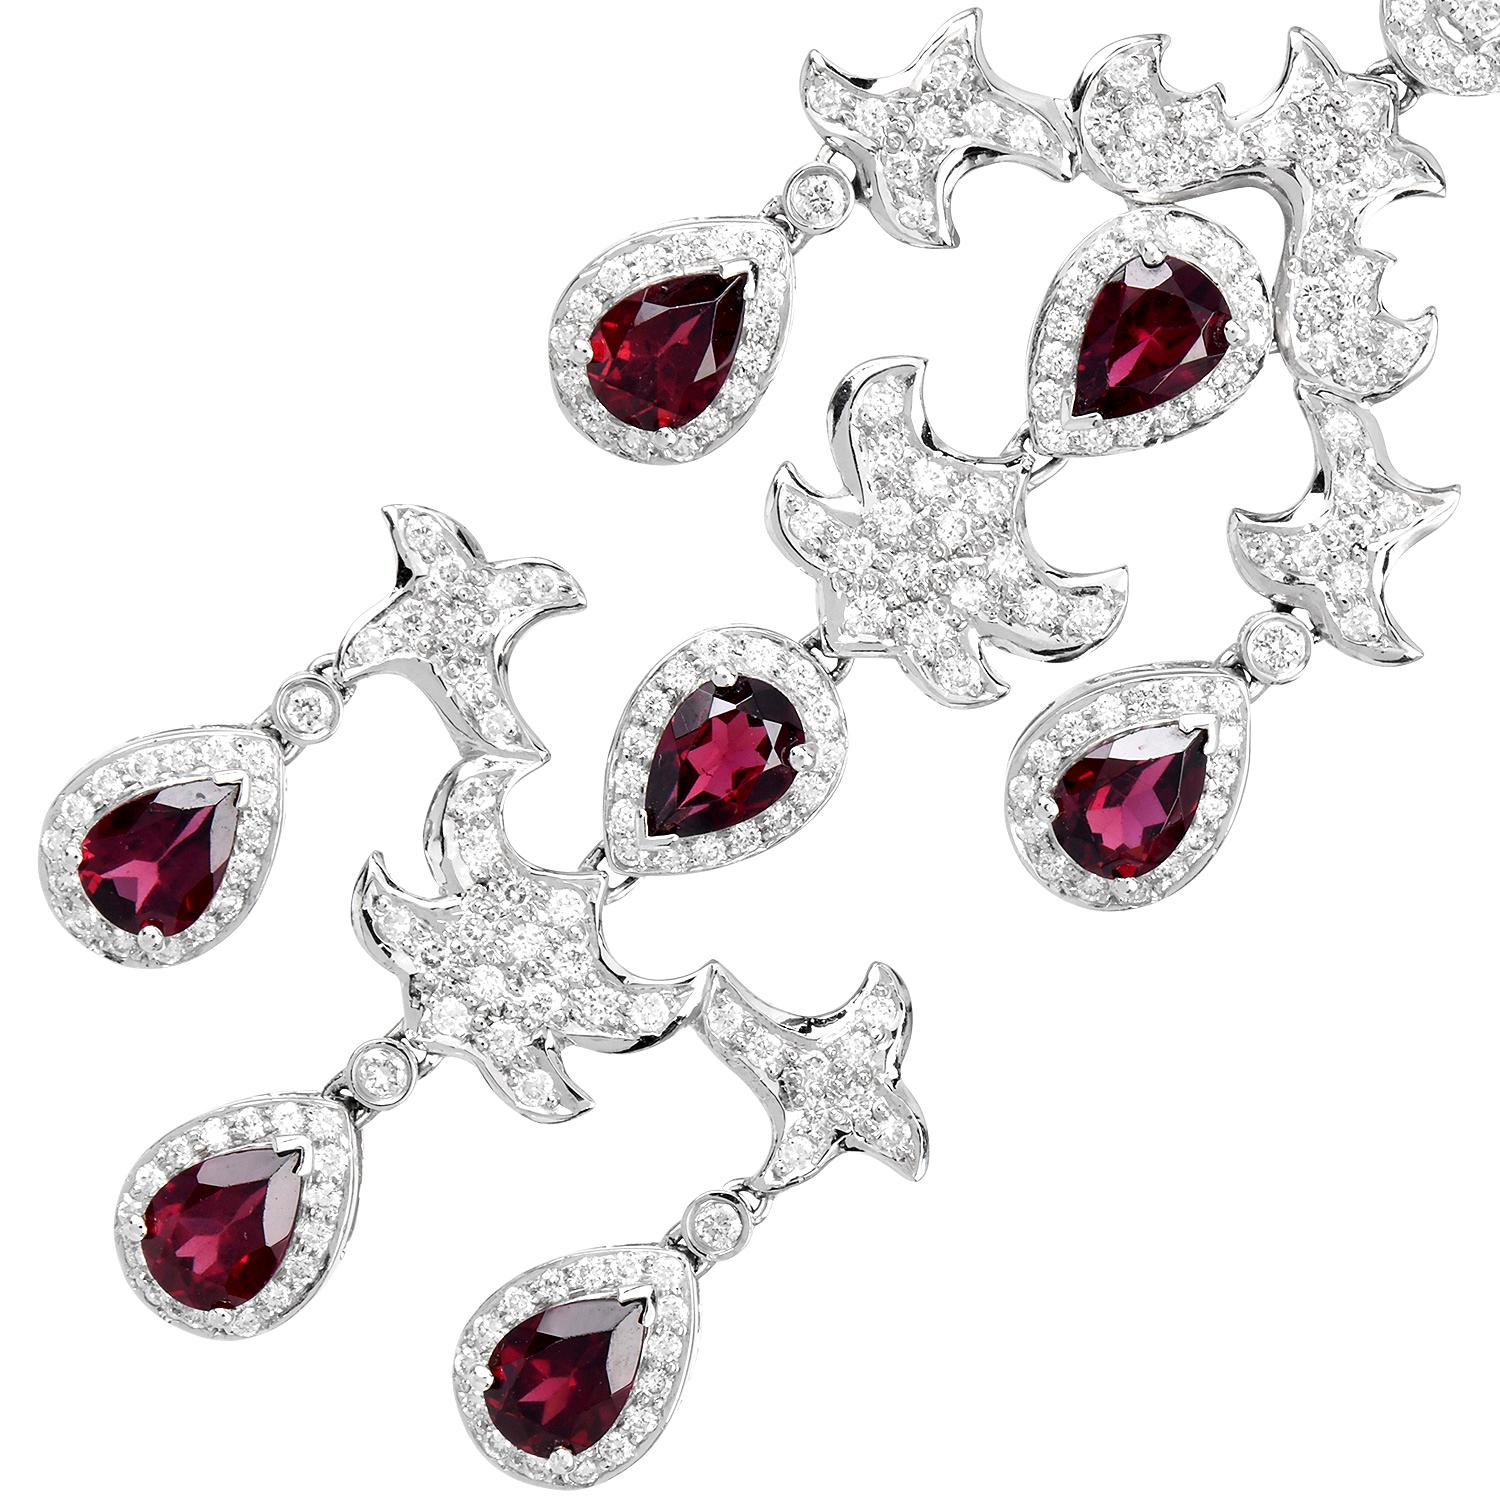 Estate floral open-design large dangle earrings, perfect for any Special Occasions.

These chandelier earrings are Crafted in solid 18K white gold and set with  (16) Red Garnets, pear-shape, and prong set, weighing a total of approximately 11.00